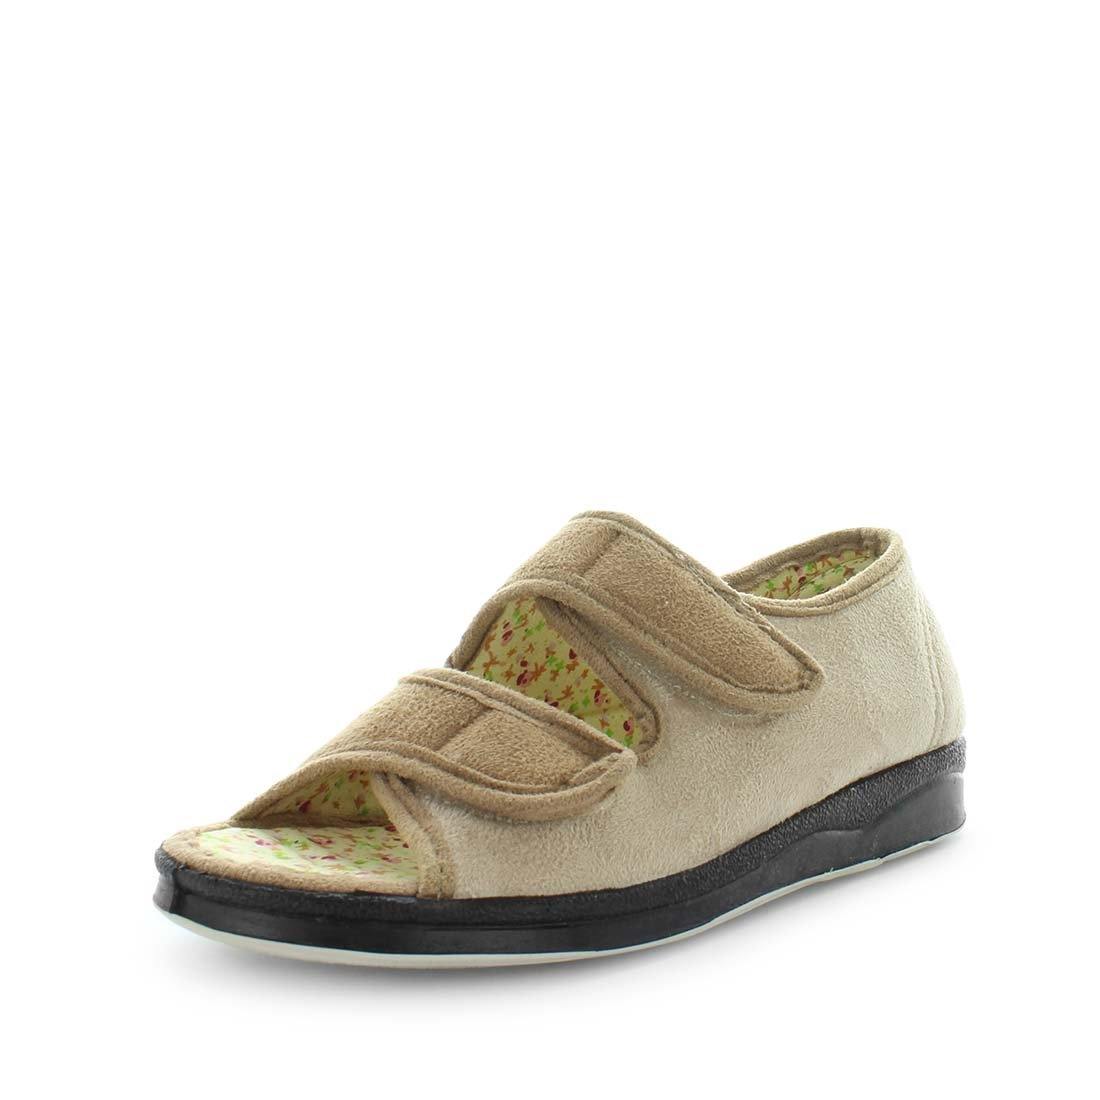 womens slippers - camel entice slipper, by panda Slippers. A sandal slipper with a soft micro-fibre design, multiple velcro straps and a padded footbed for an extra comfy fit